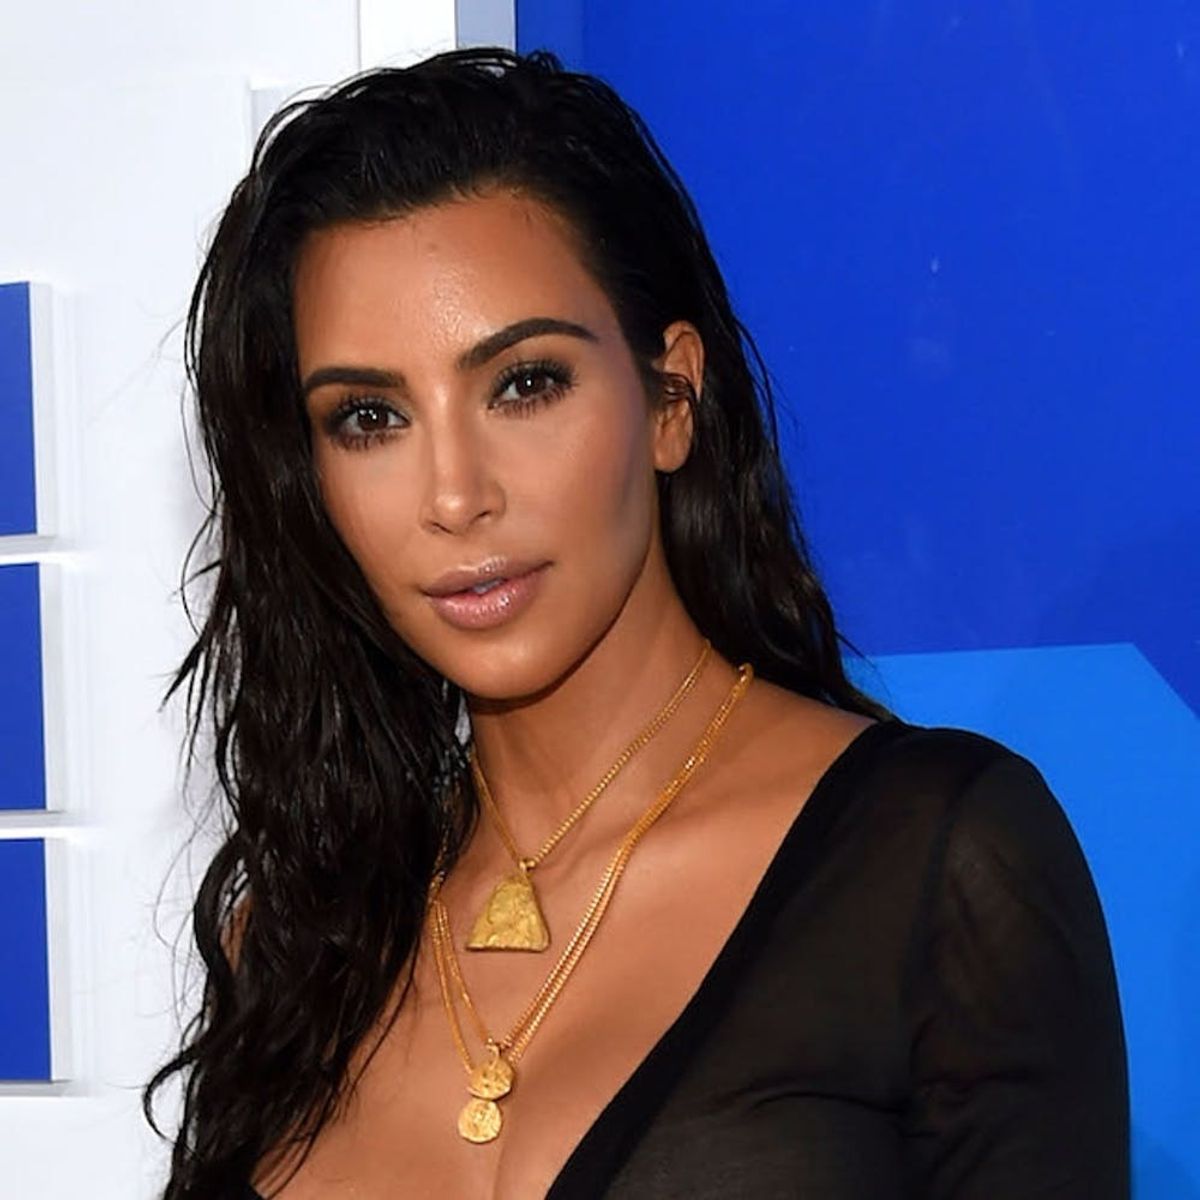 Morning Buzz! Kim Kardashian Reveals the Risky Surgery She’s Planning As a Last Attempt to Have More Kids + More